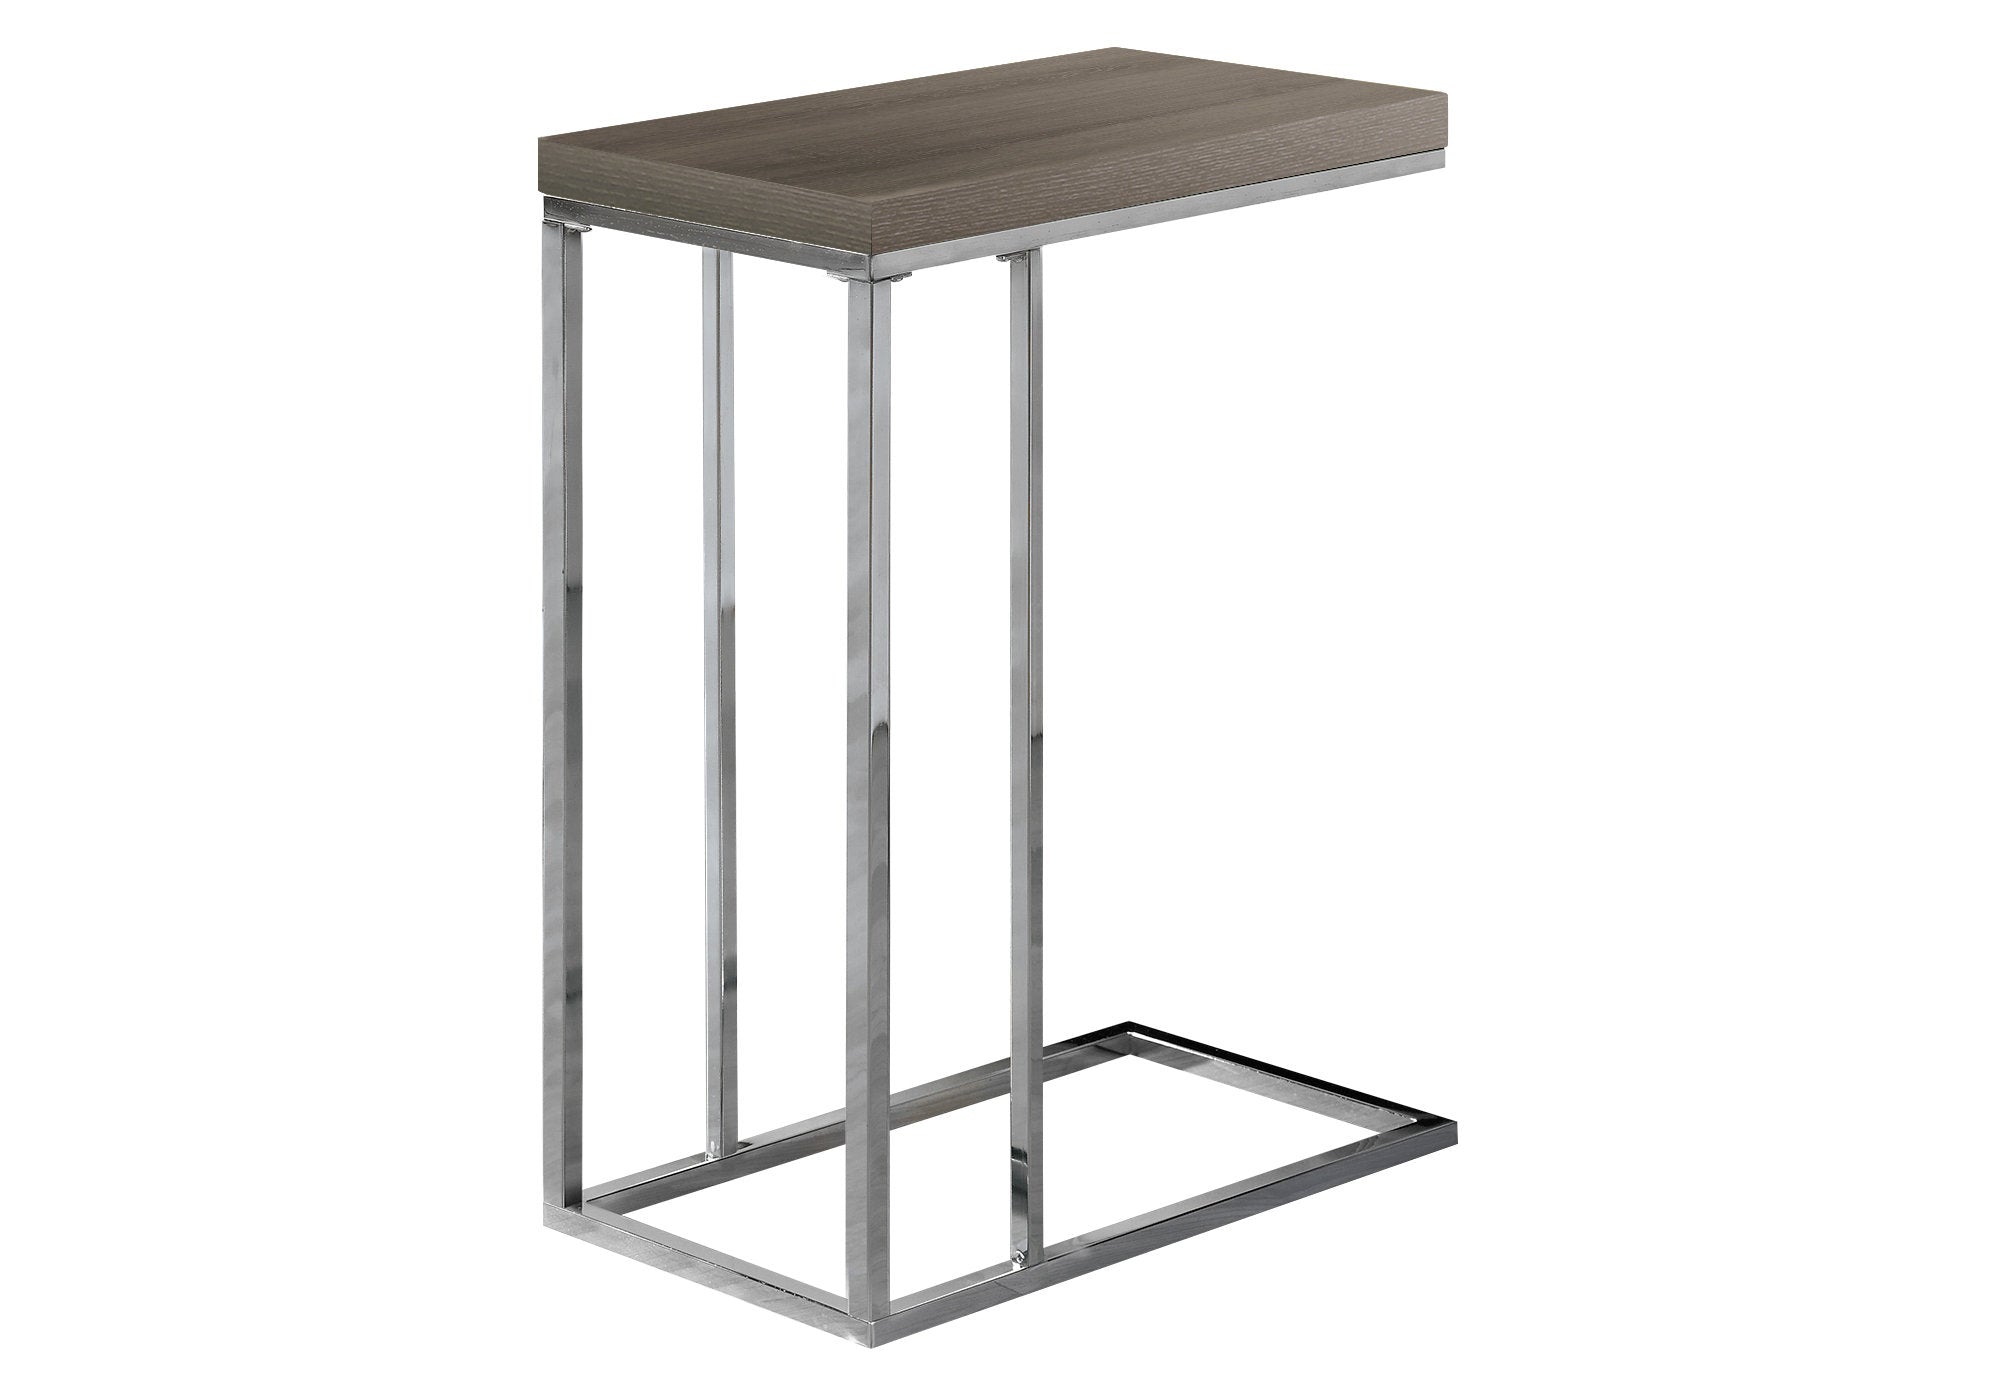 18.25" X 10.25" X 25.25" Dark Taupe Particle Board Metal  Accent Table